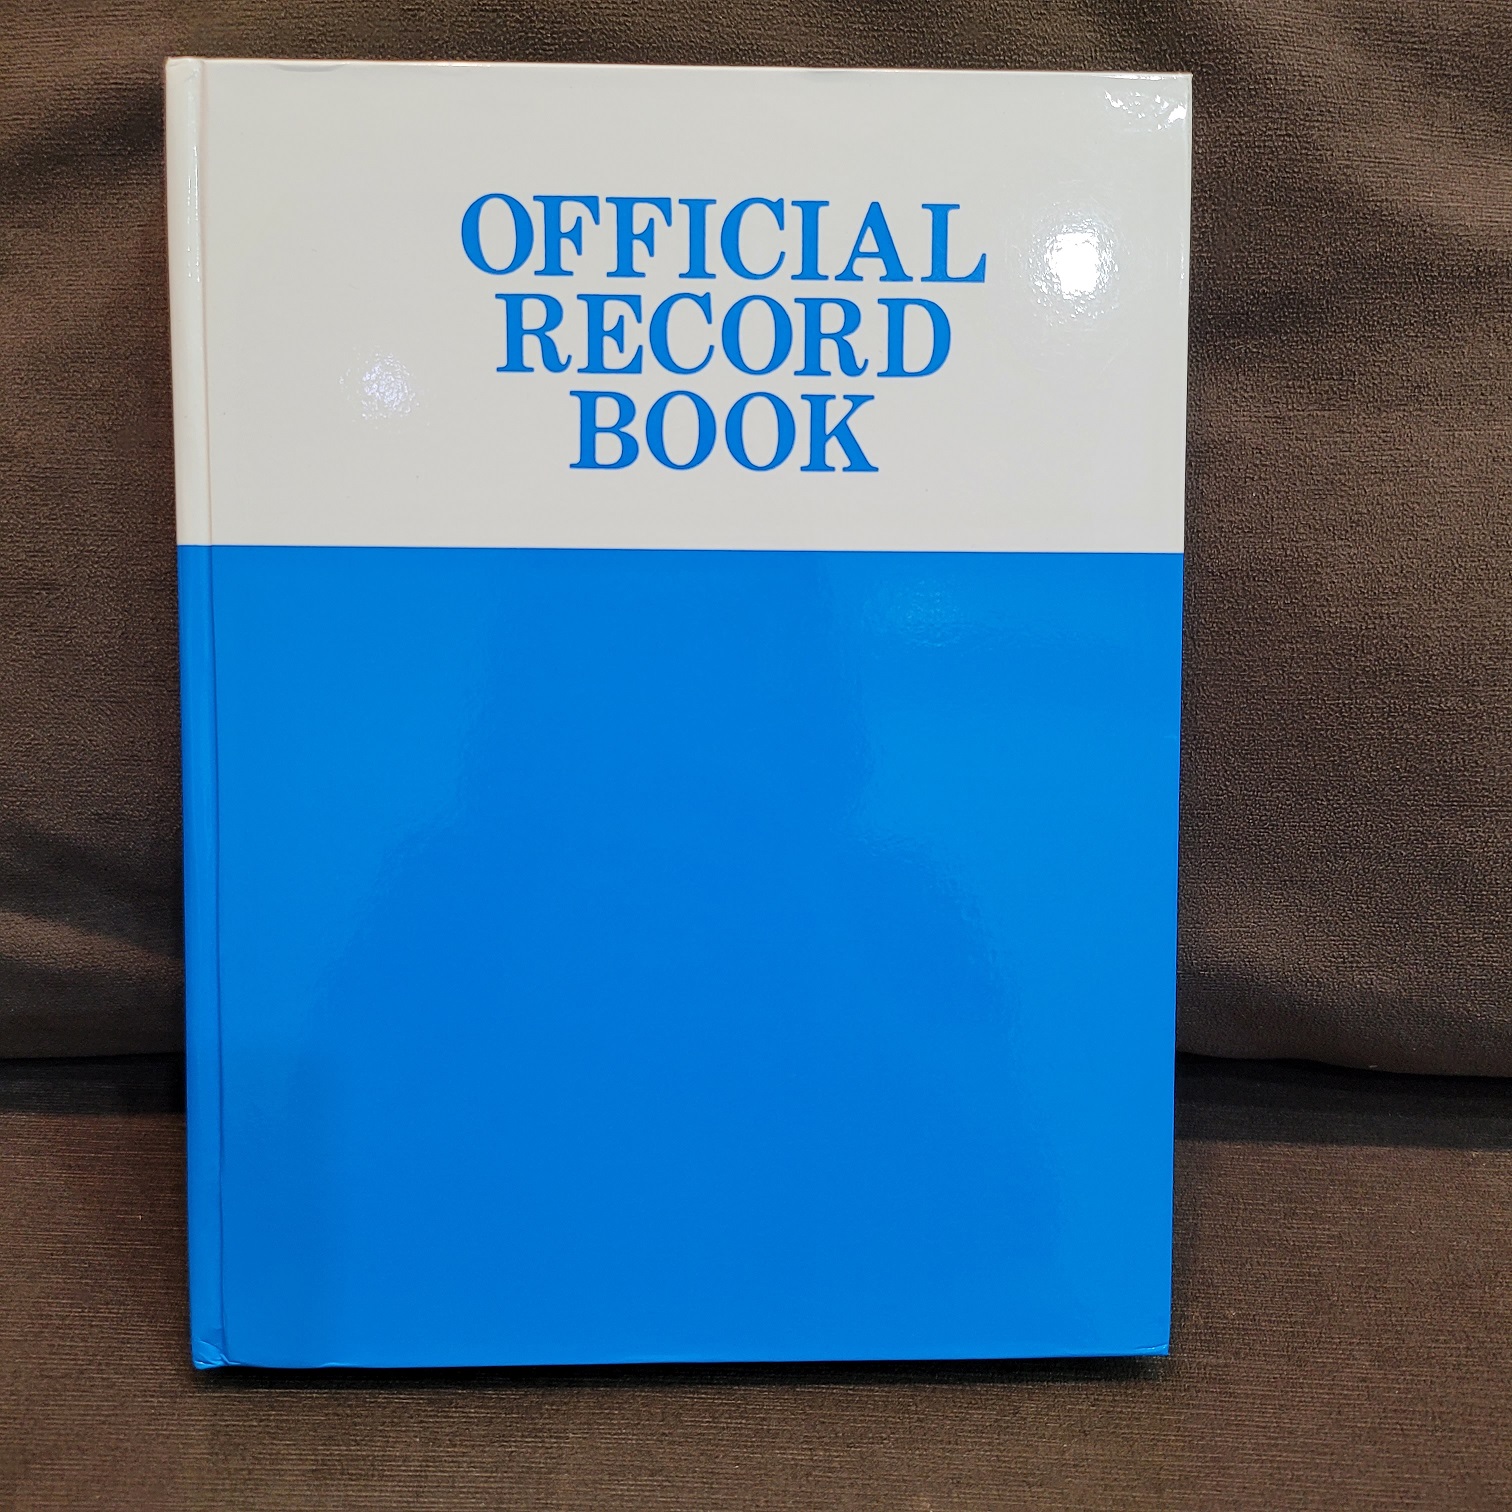 official-record-book-m-o-office-products-8-5-x-11-inches-500-pages